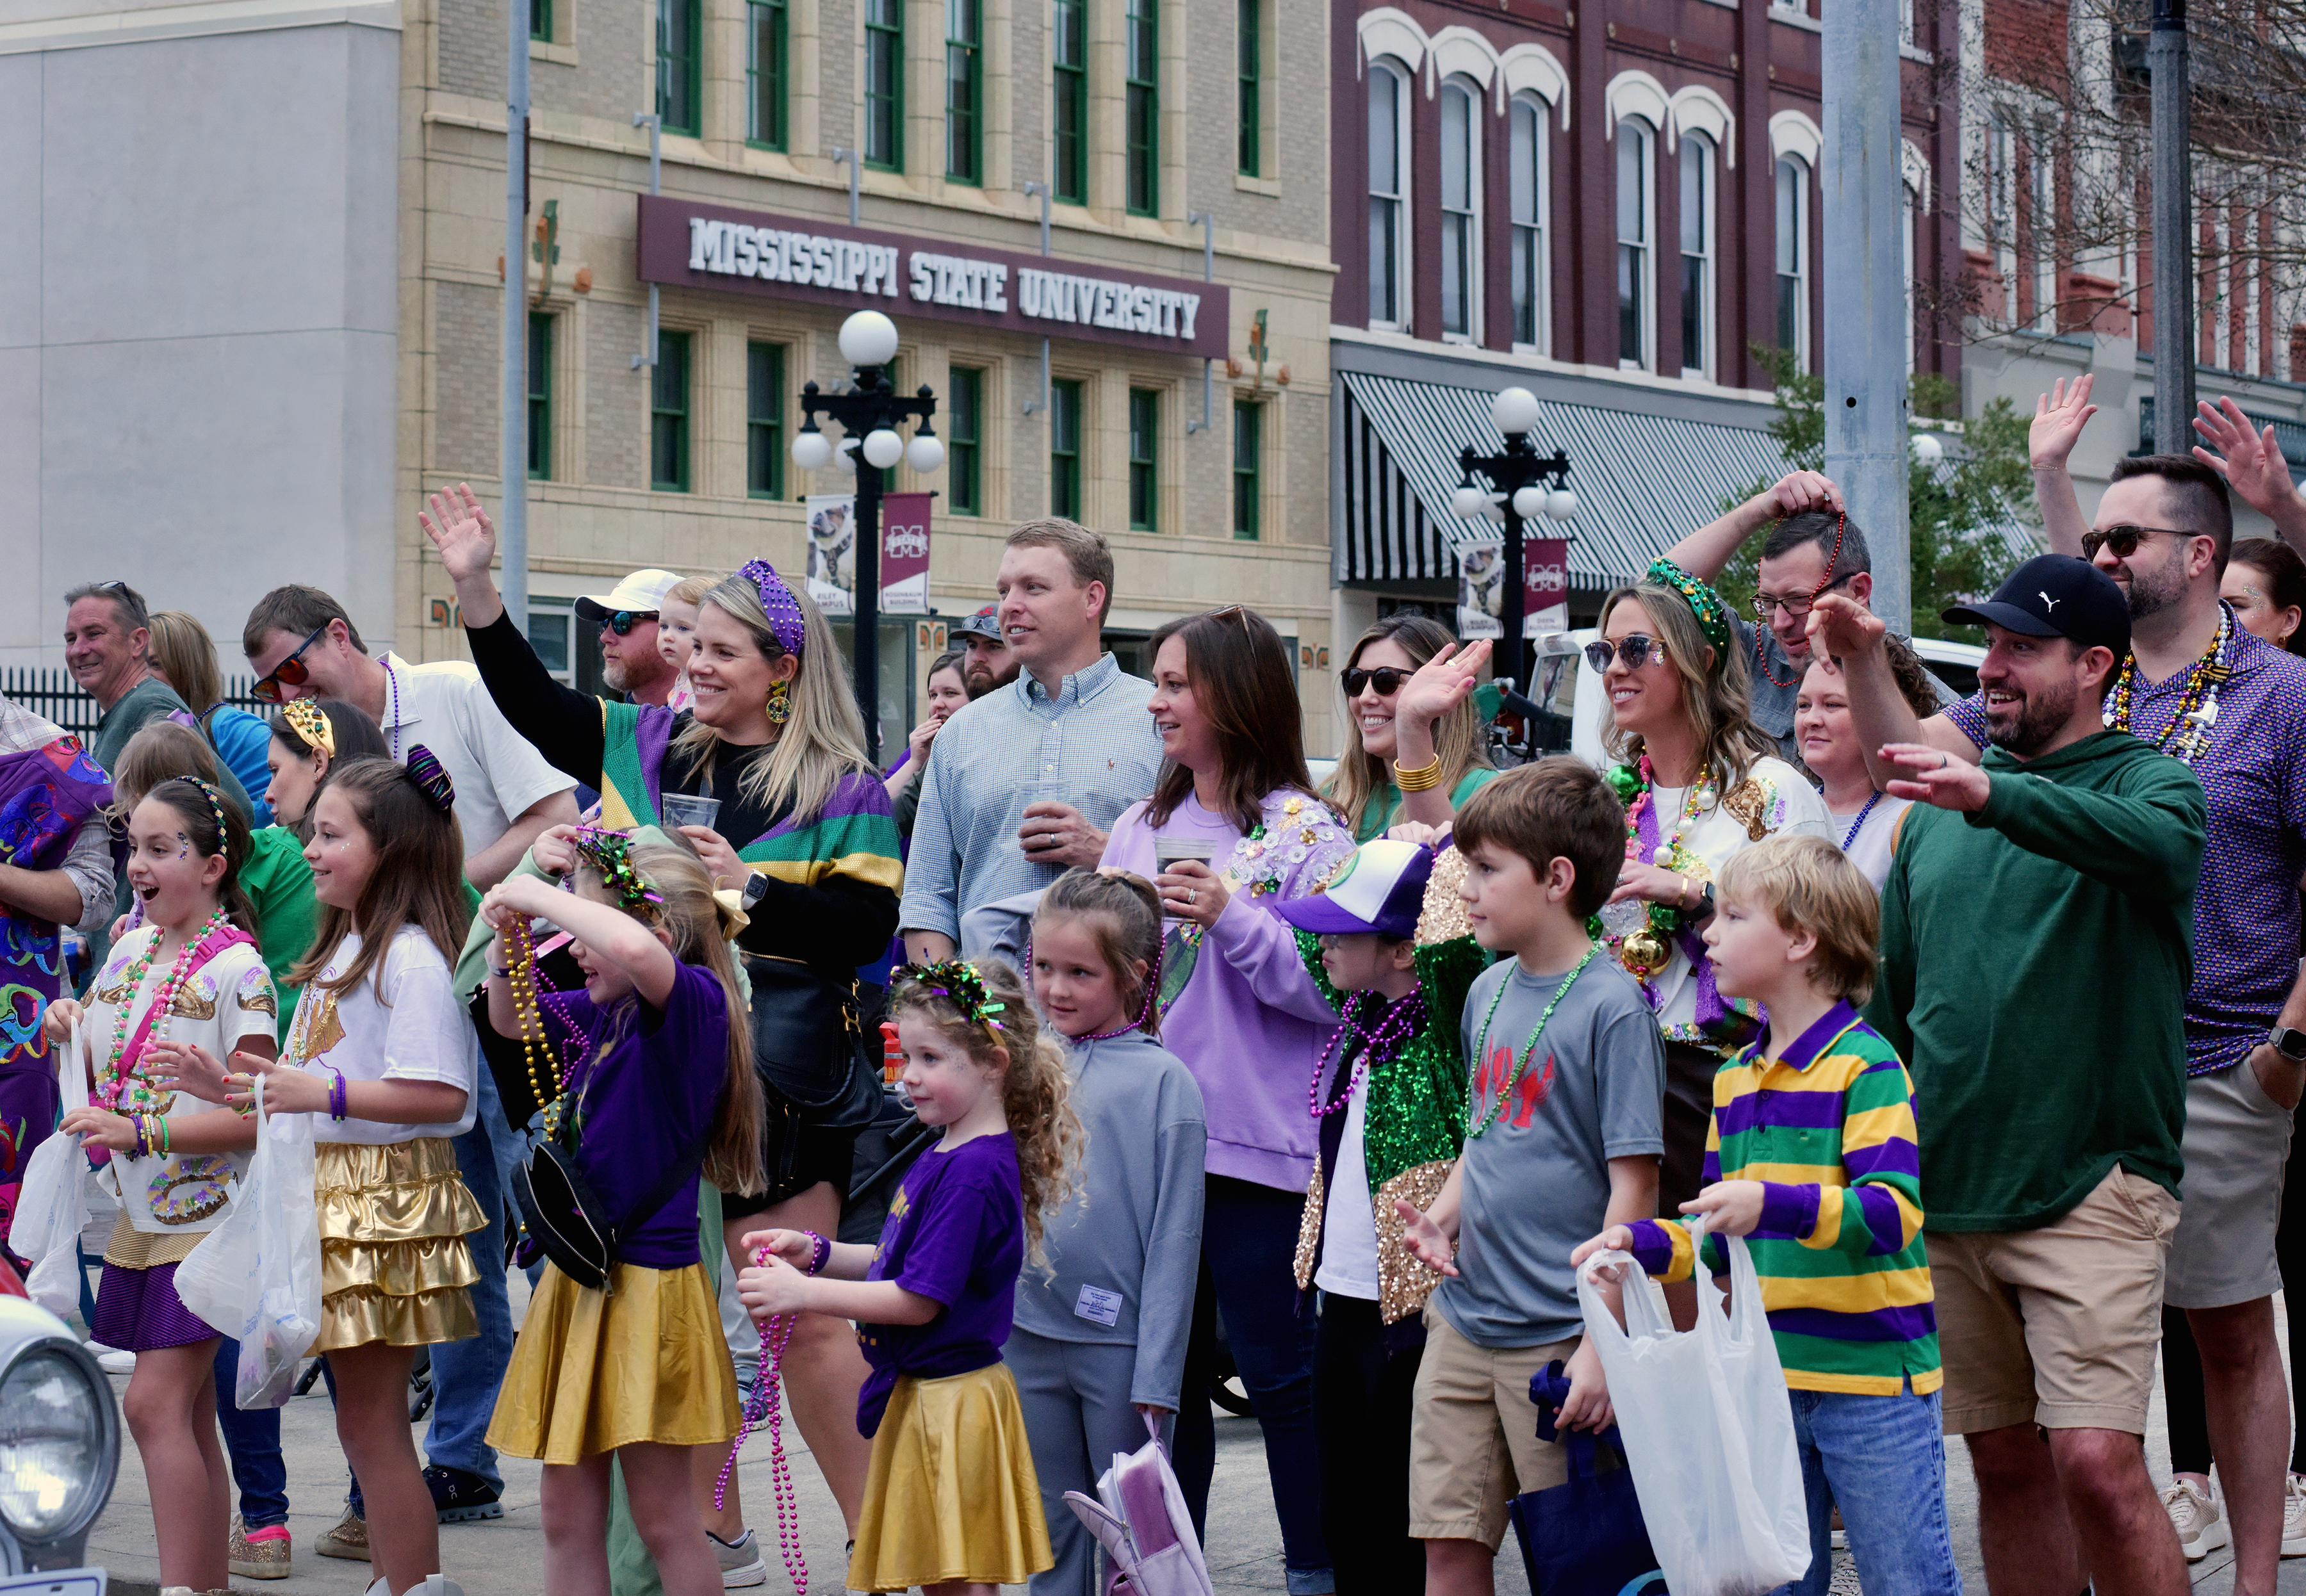 Revelers gather in front of MSU-Meridian's Riley Campus to catch beads in the Meridian Mardi Gras Parade. Morgan Dudley,  director of conferences, events and operations, served as queen of the parade on Saturday. (Photo by Marianne Todd) 